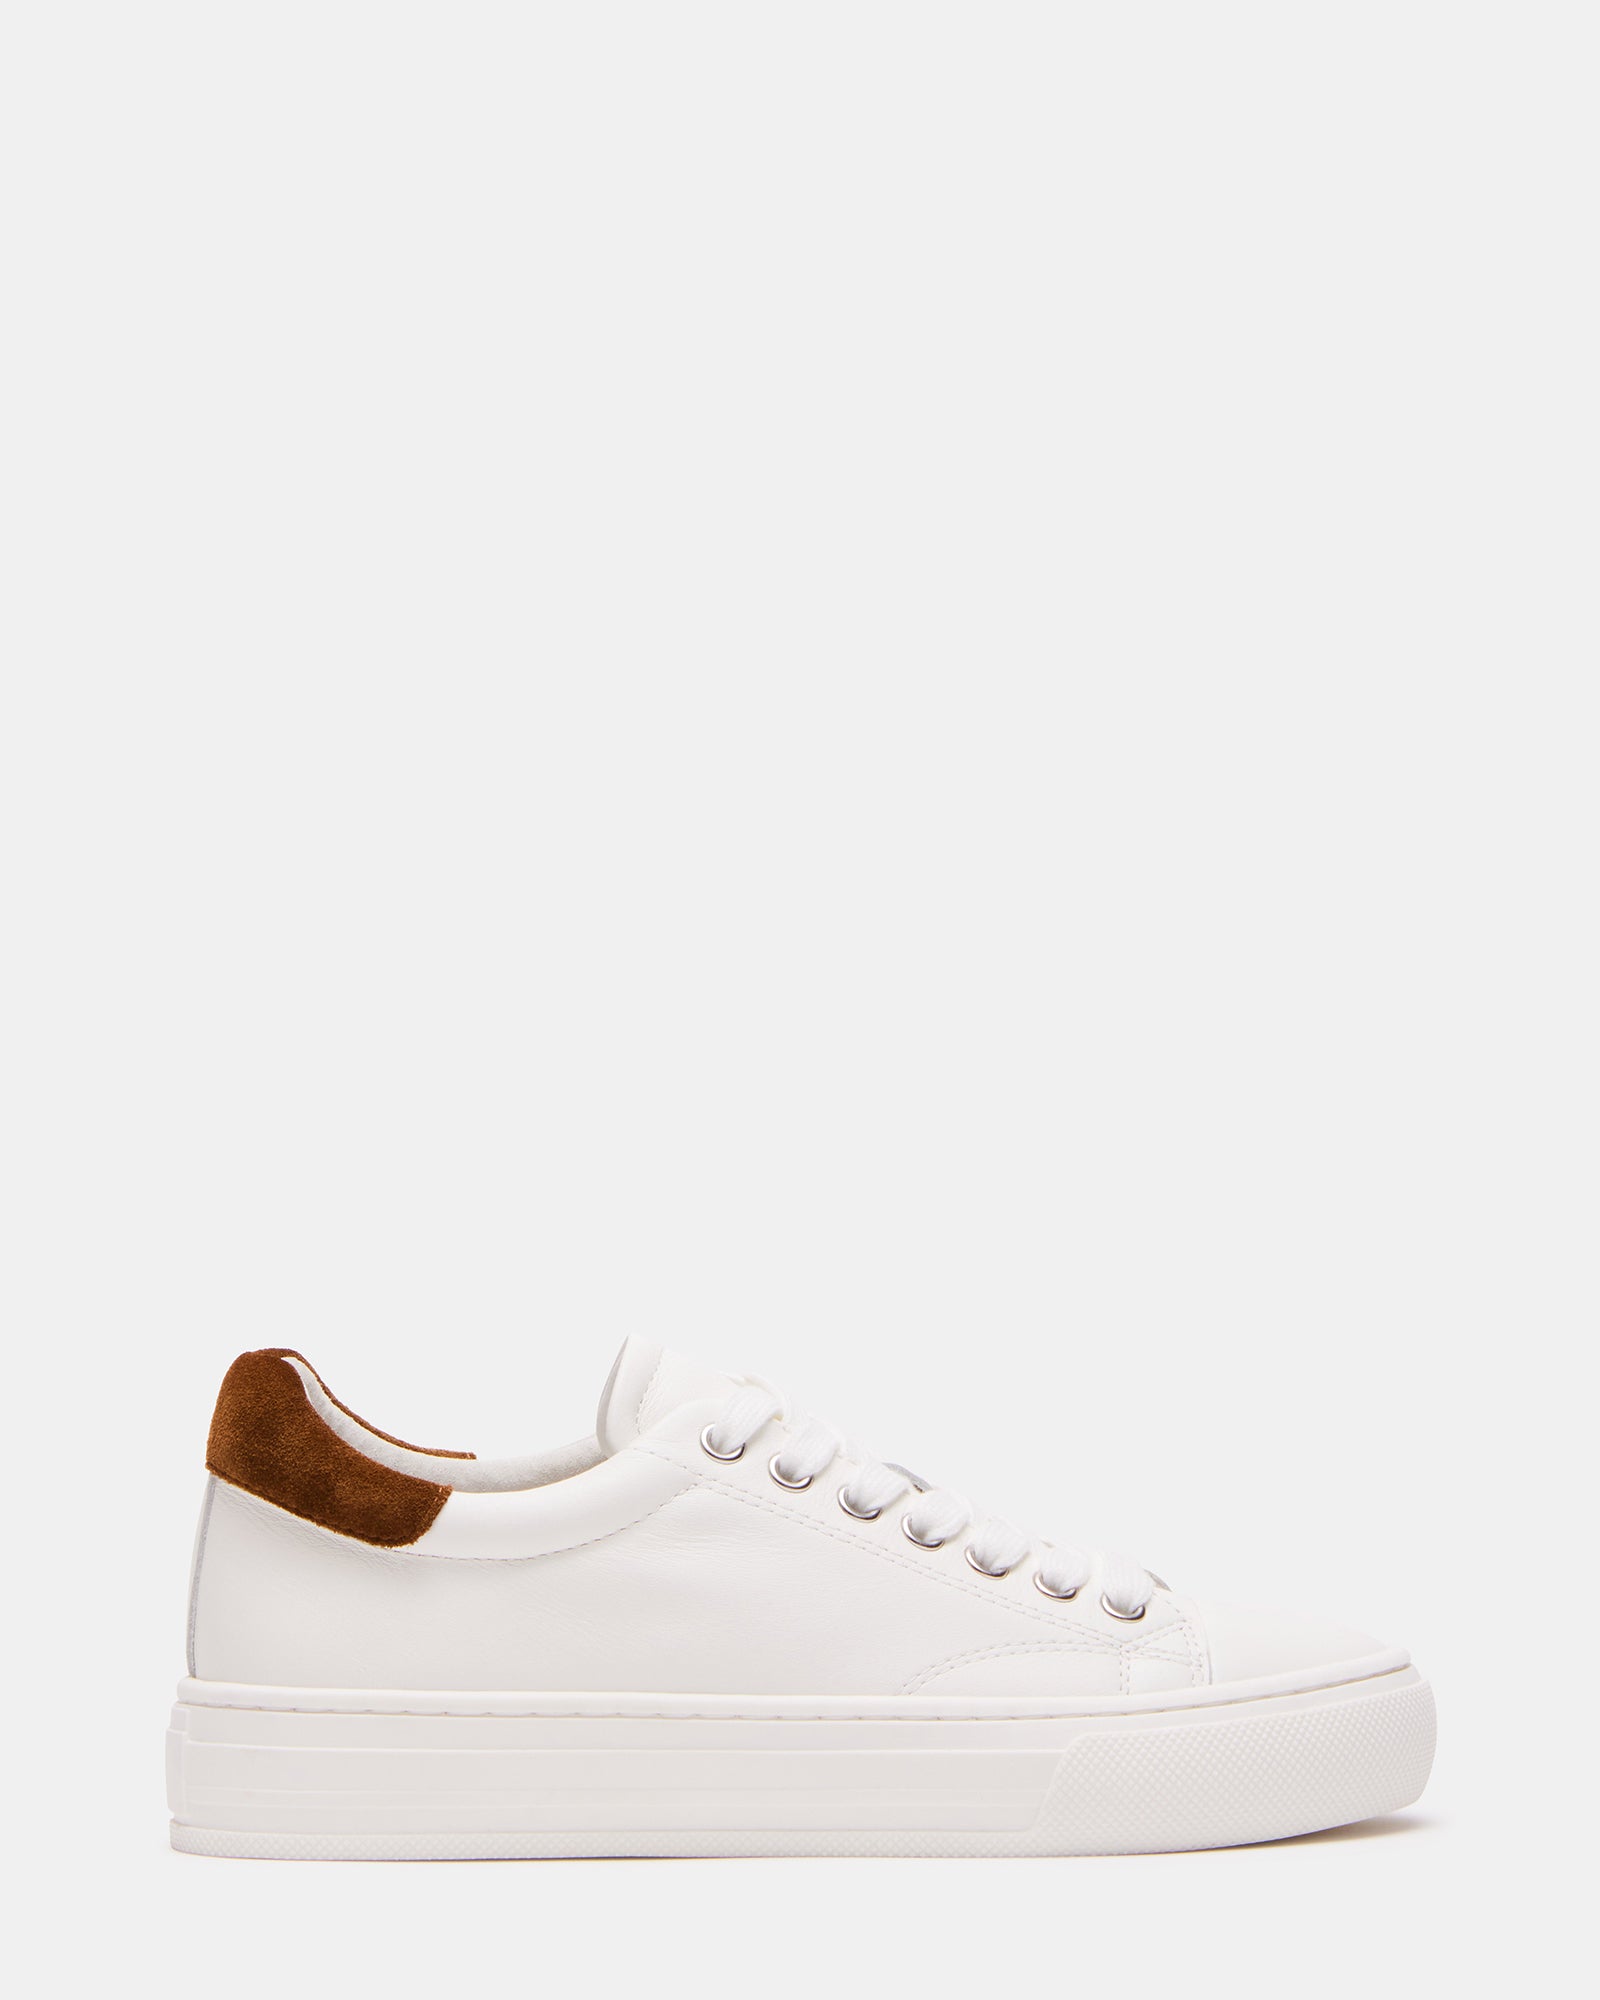 CAPTIVATE White/Camel Low-Top Lace-Up Sneaker | Women's Sneakers ...